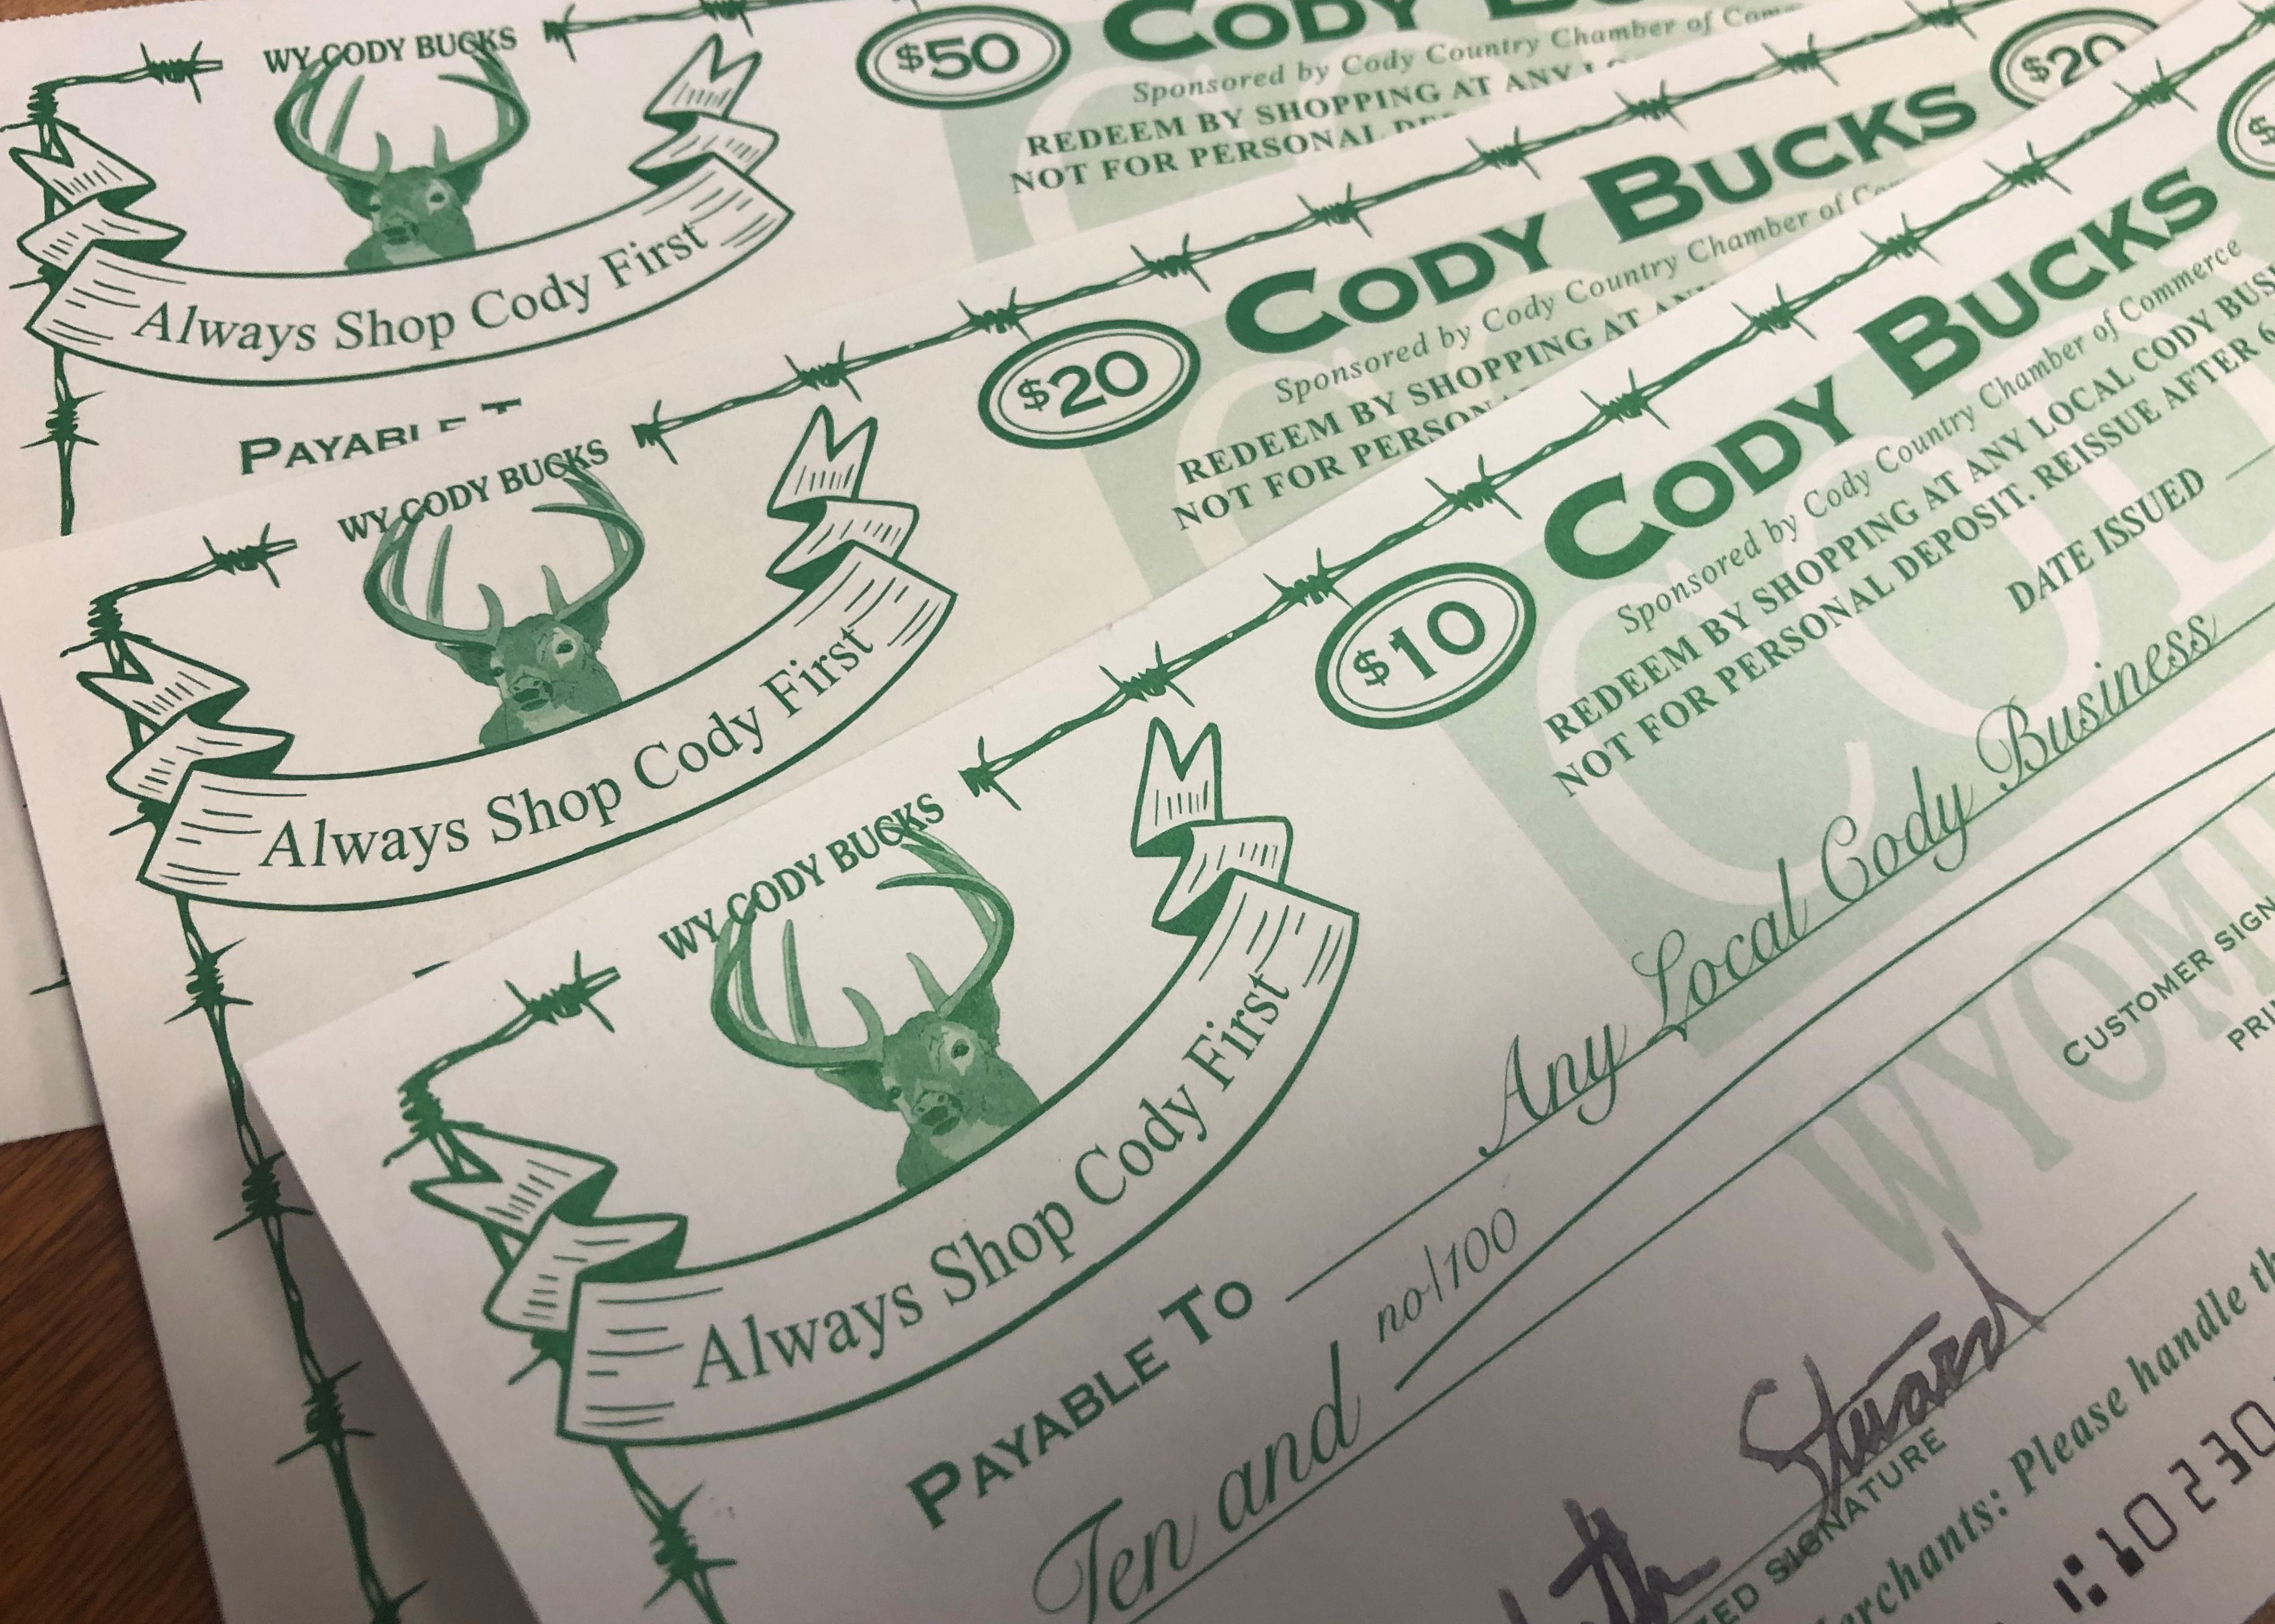 A photograph of several Cody Bucks certificates